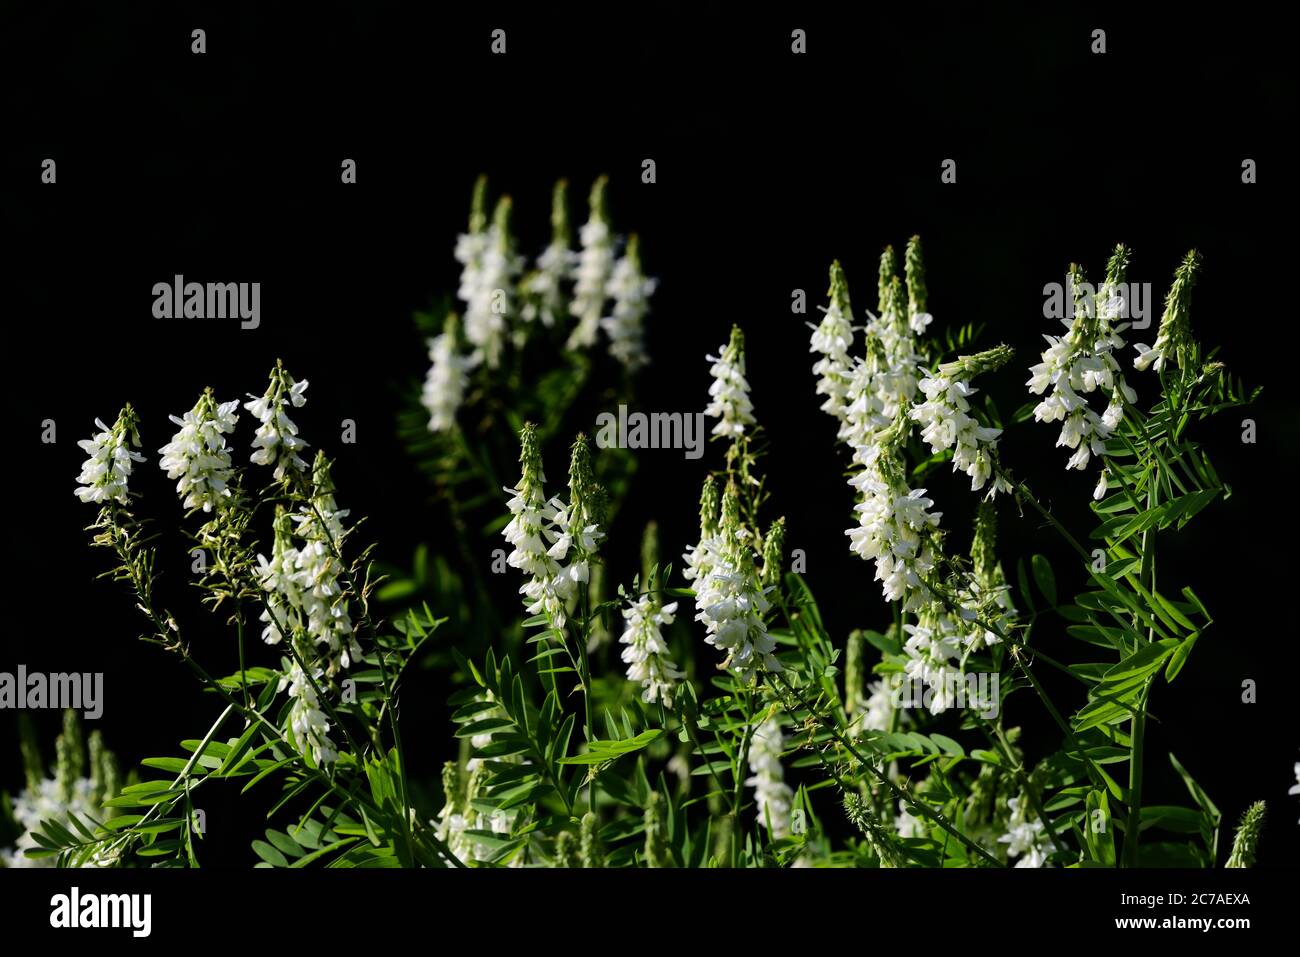 White flowers of the goat's rue (galega officinalis) bloom in front of a dark background in the garden Stock Photo